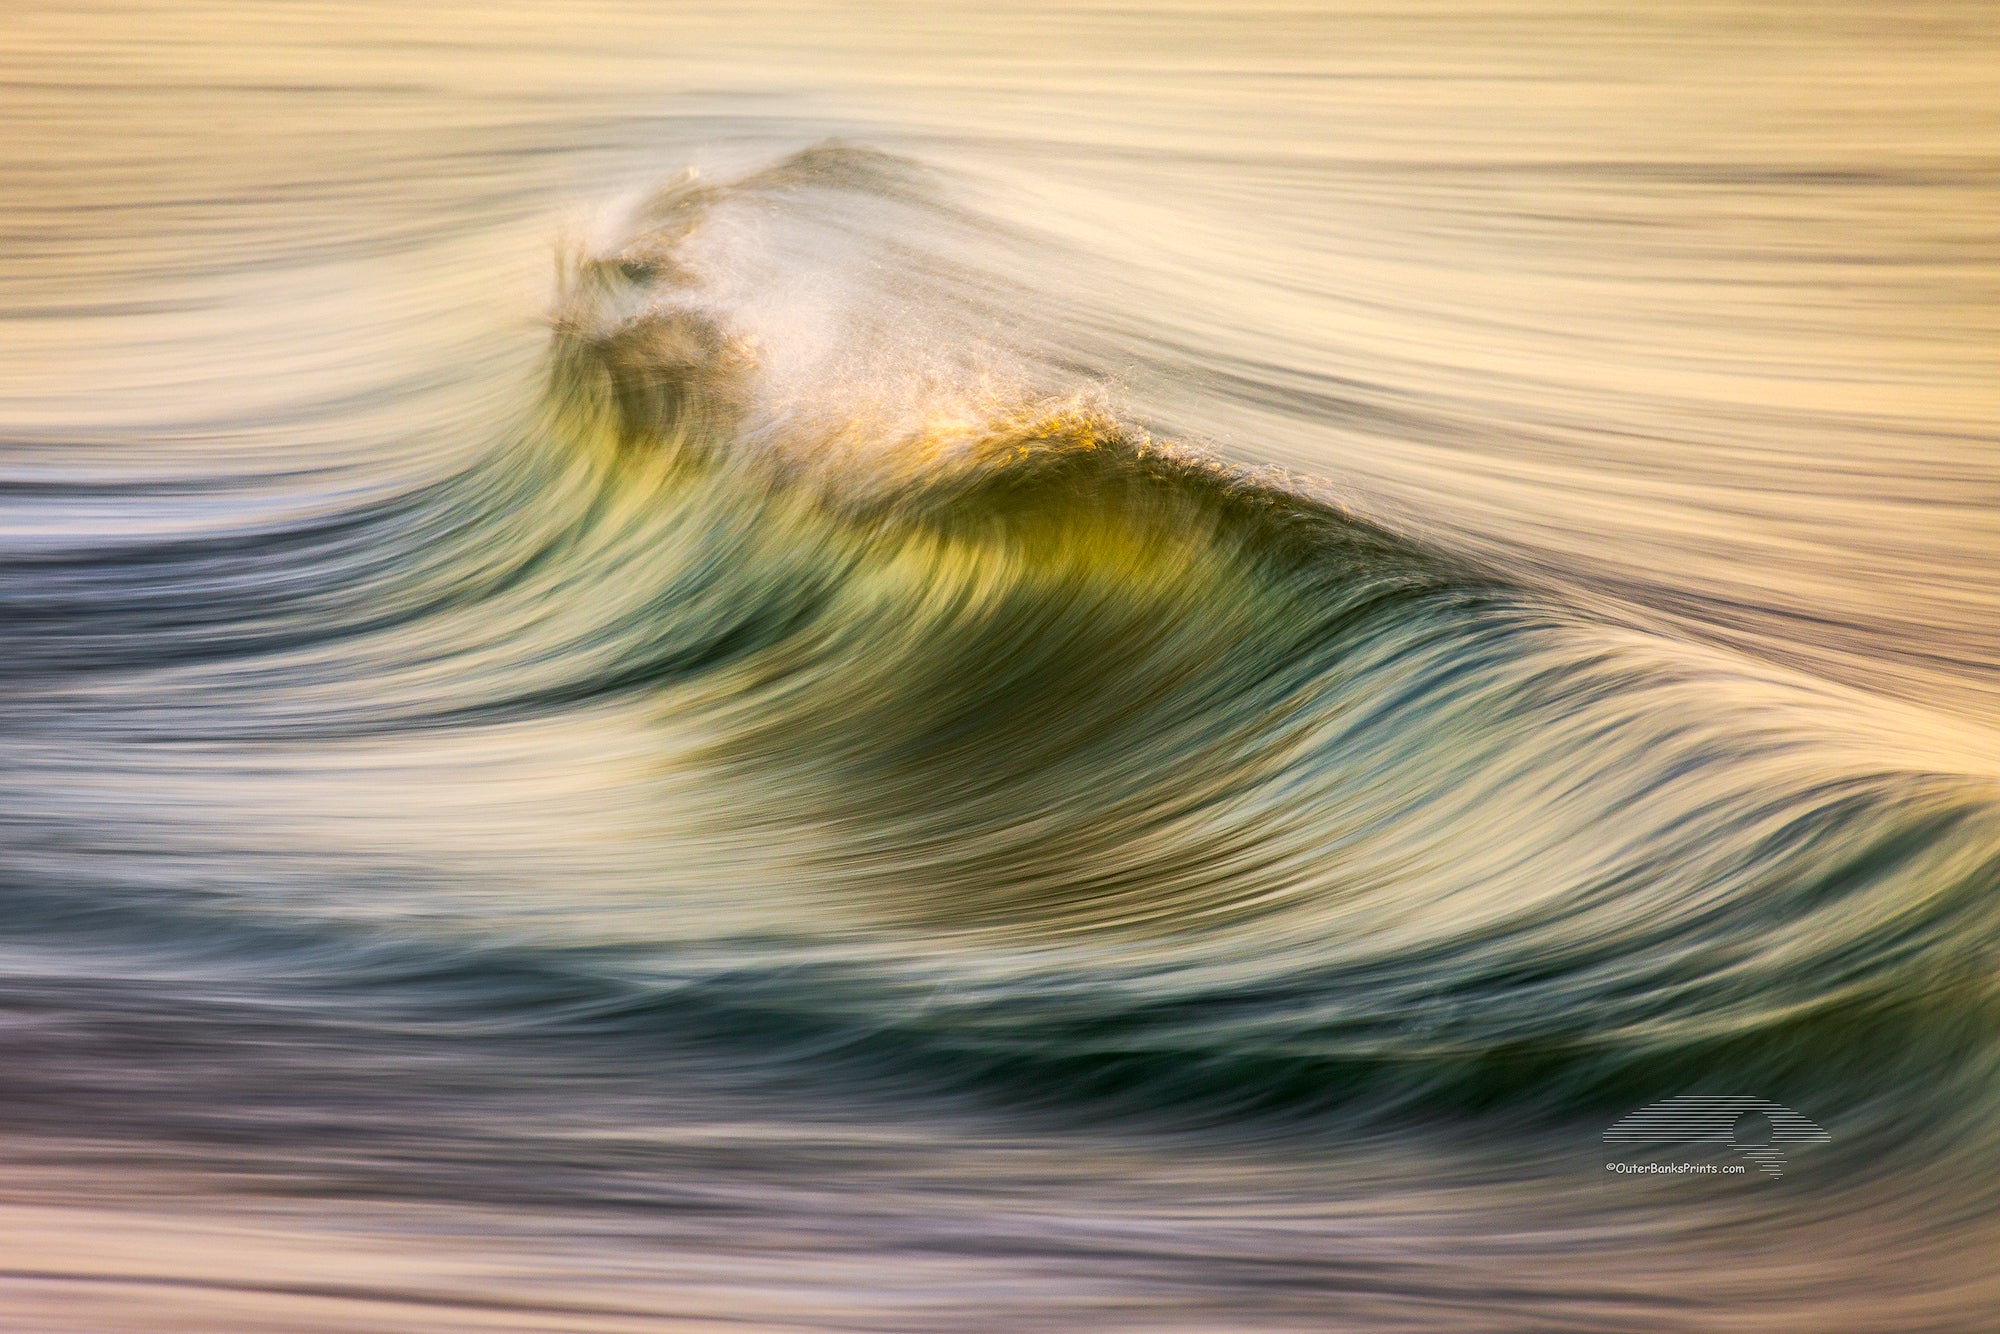 Motion of the early morning surf on the beach at Kitty Hawk on the Outer Banks of NC.